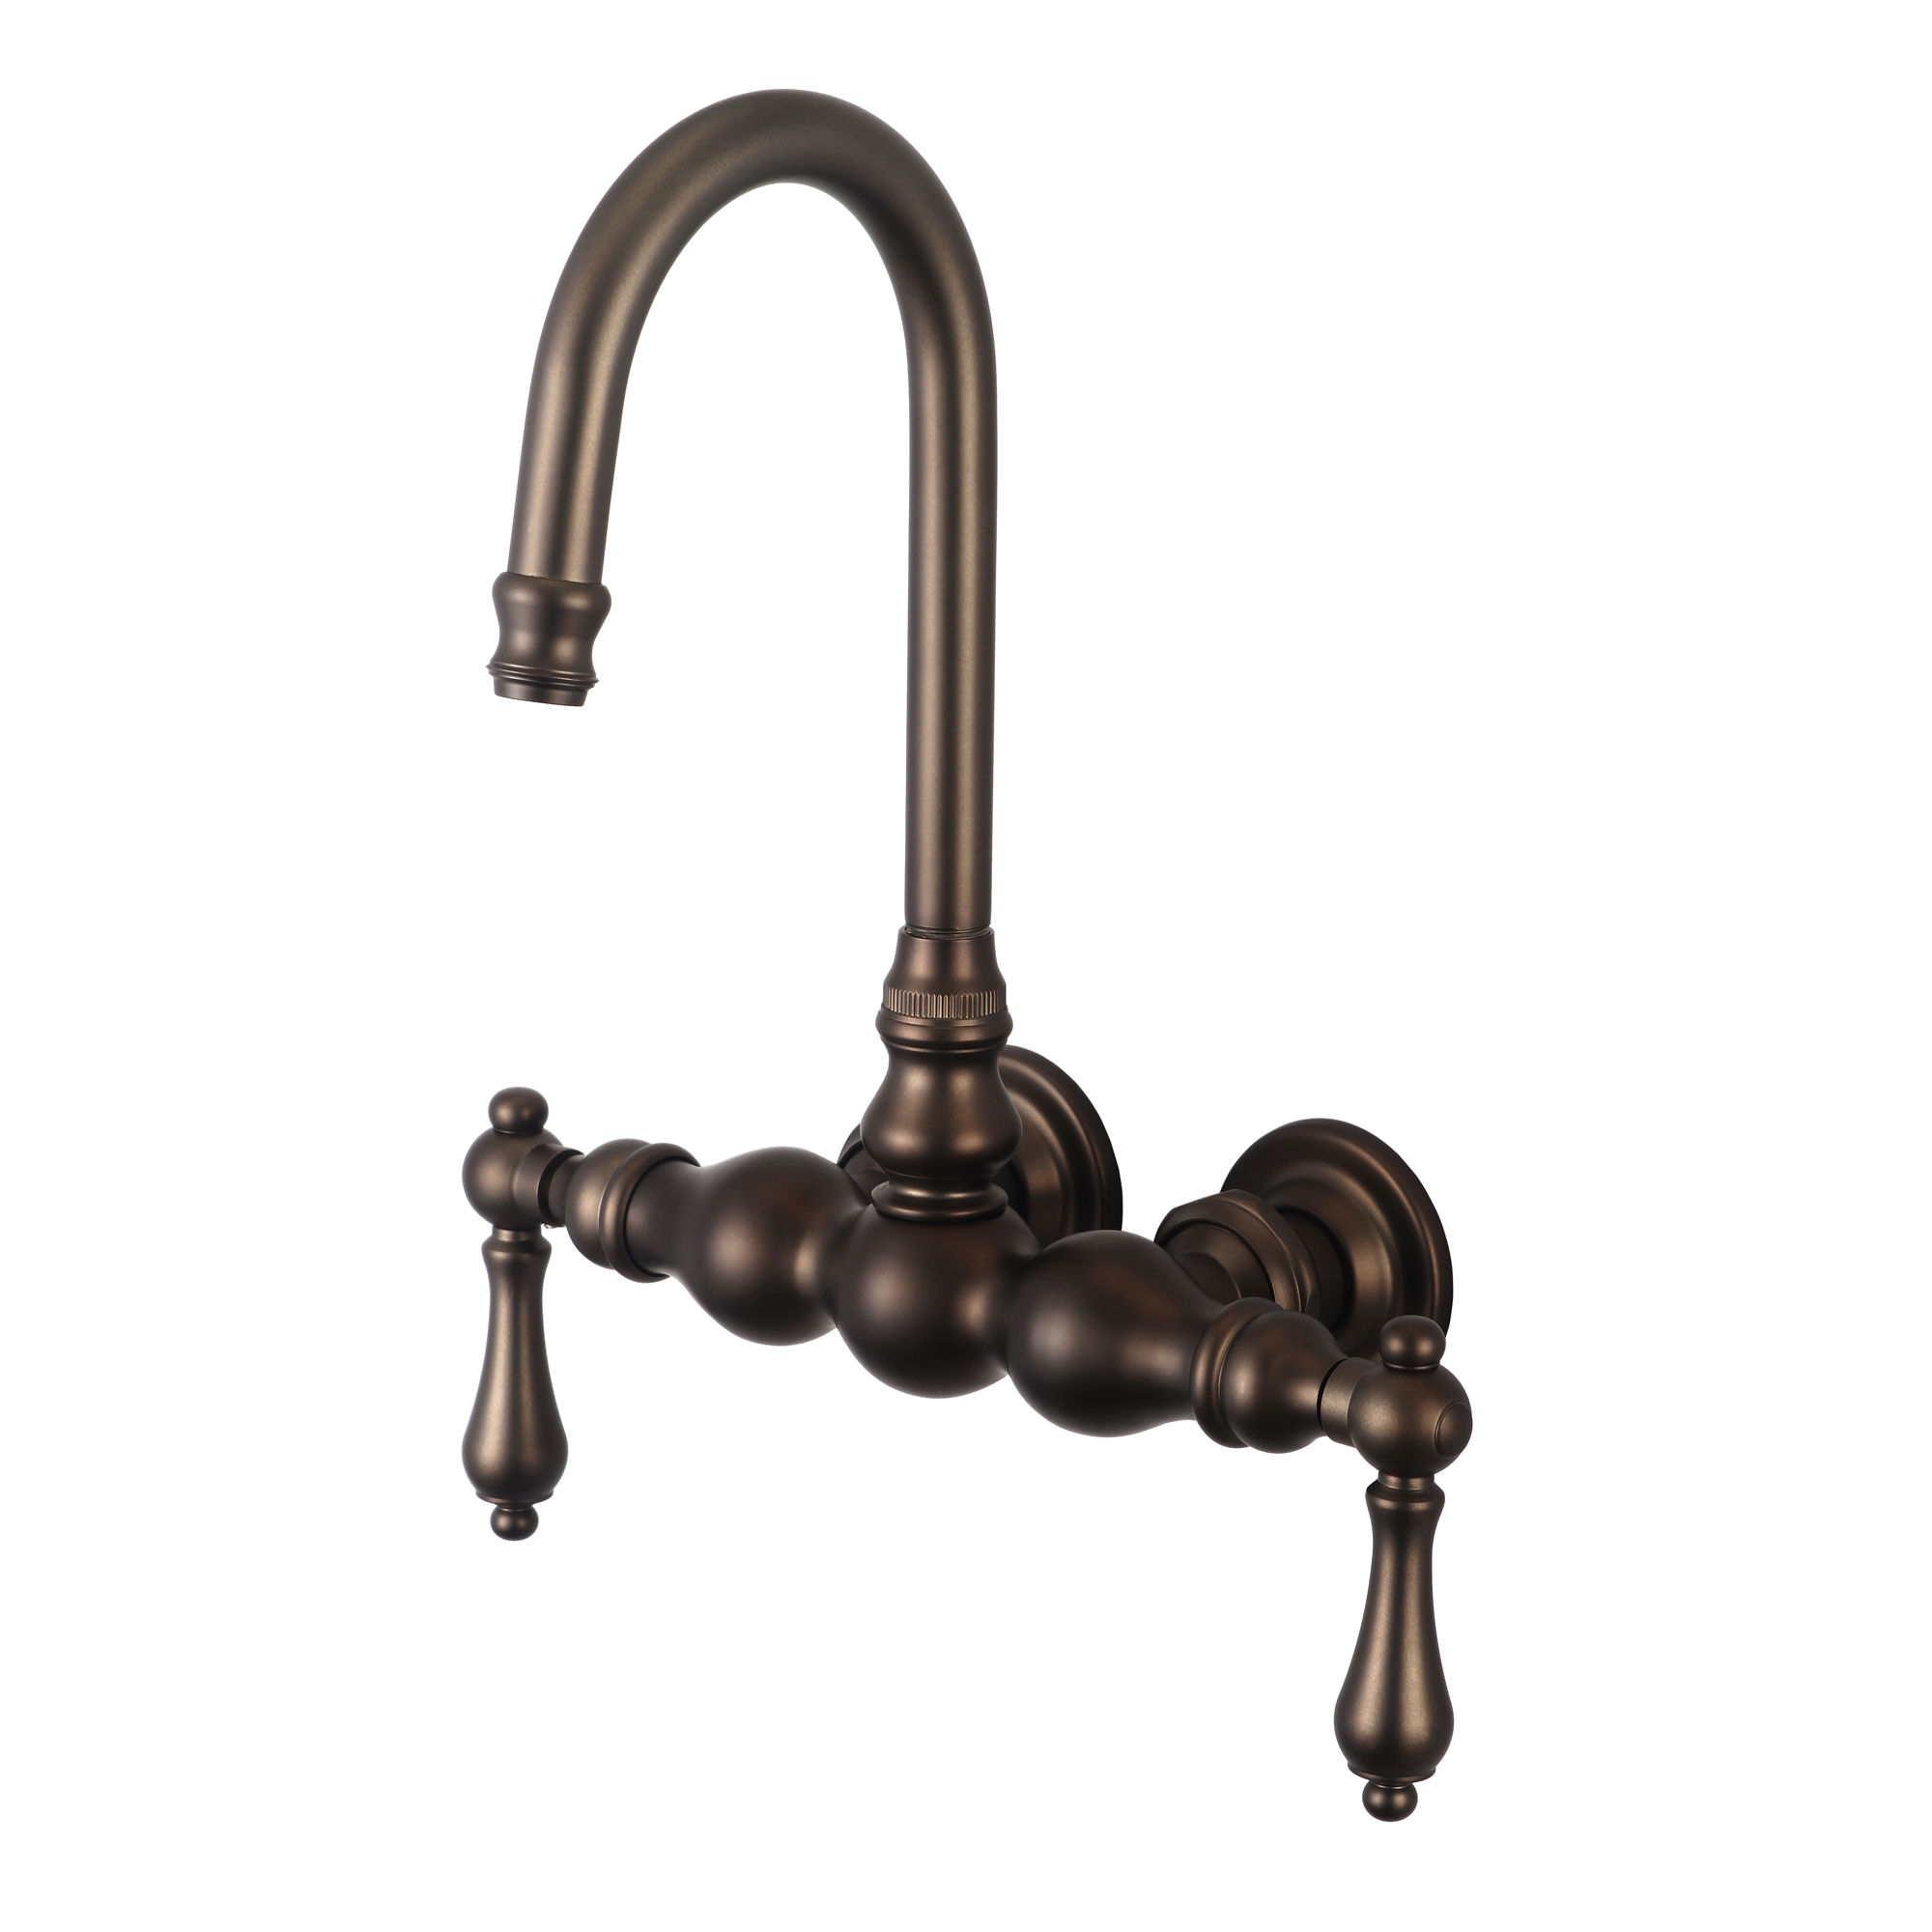 Vintage Classic 3.375 Inch Center Wall Mount Tub Faucet With Gooseneck Spout & Straight Wall Connector in Oil-rubbed Bronze Finish Finish With Metal Lever Handles Without Labels